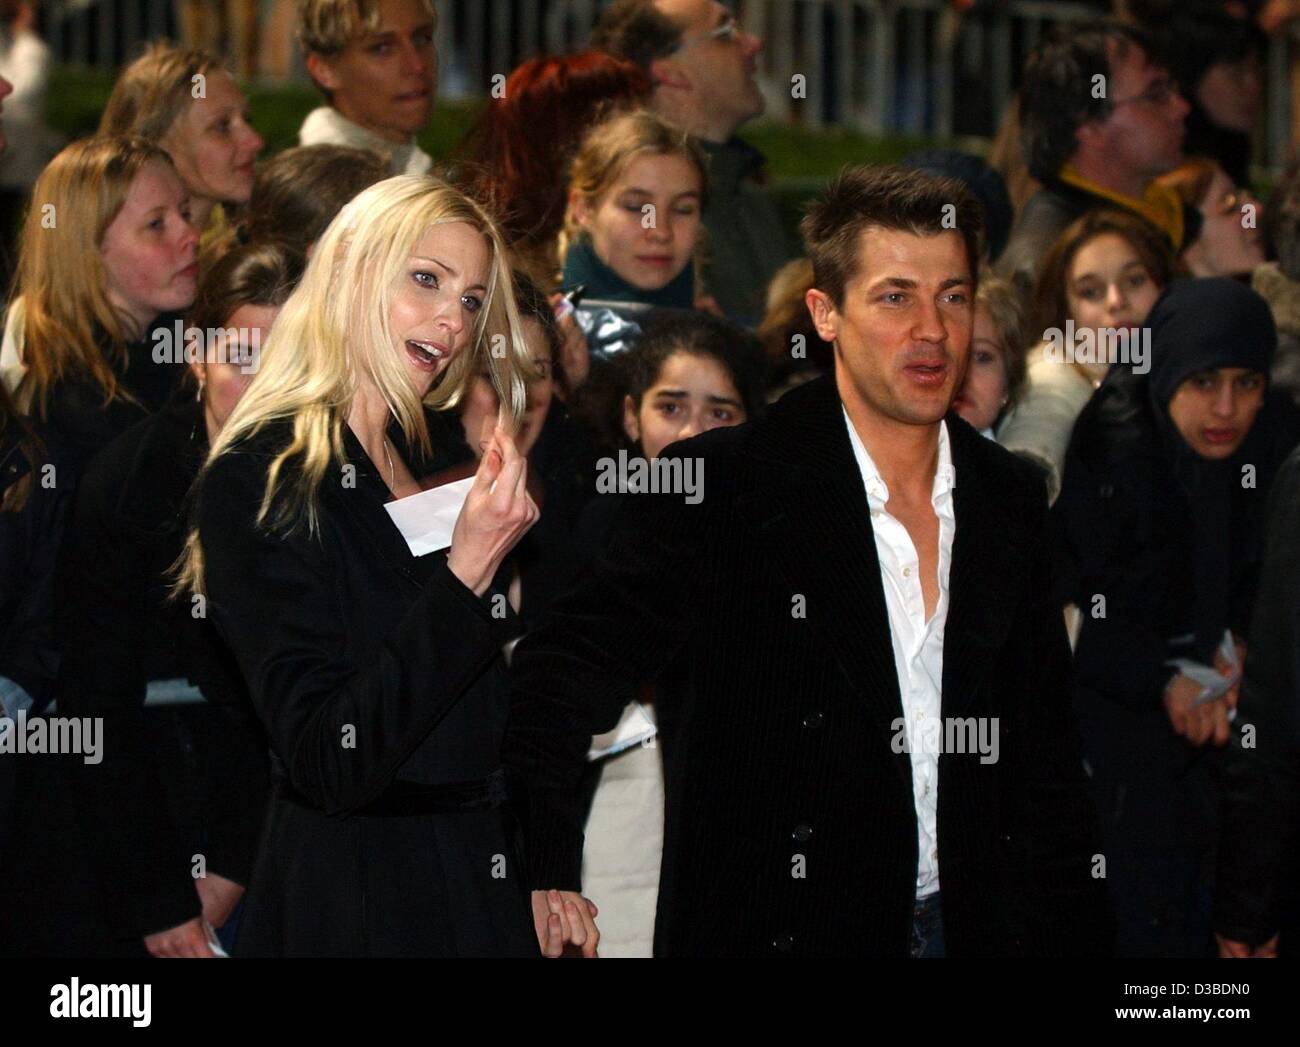 (dpa) - German top model Nadja Auermann and her husband, actor Wolfram Grandezka, arrive for the German premiere of the film 'Catch Me If You Can' in Berlin, 26 January 2003. Stock Photo